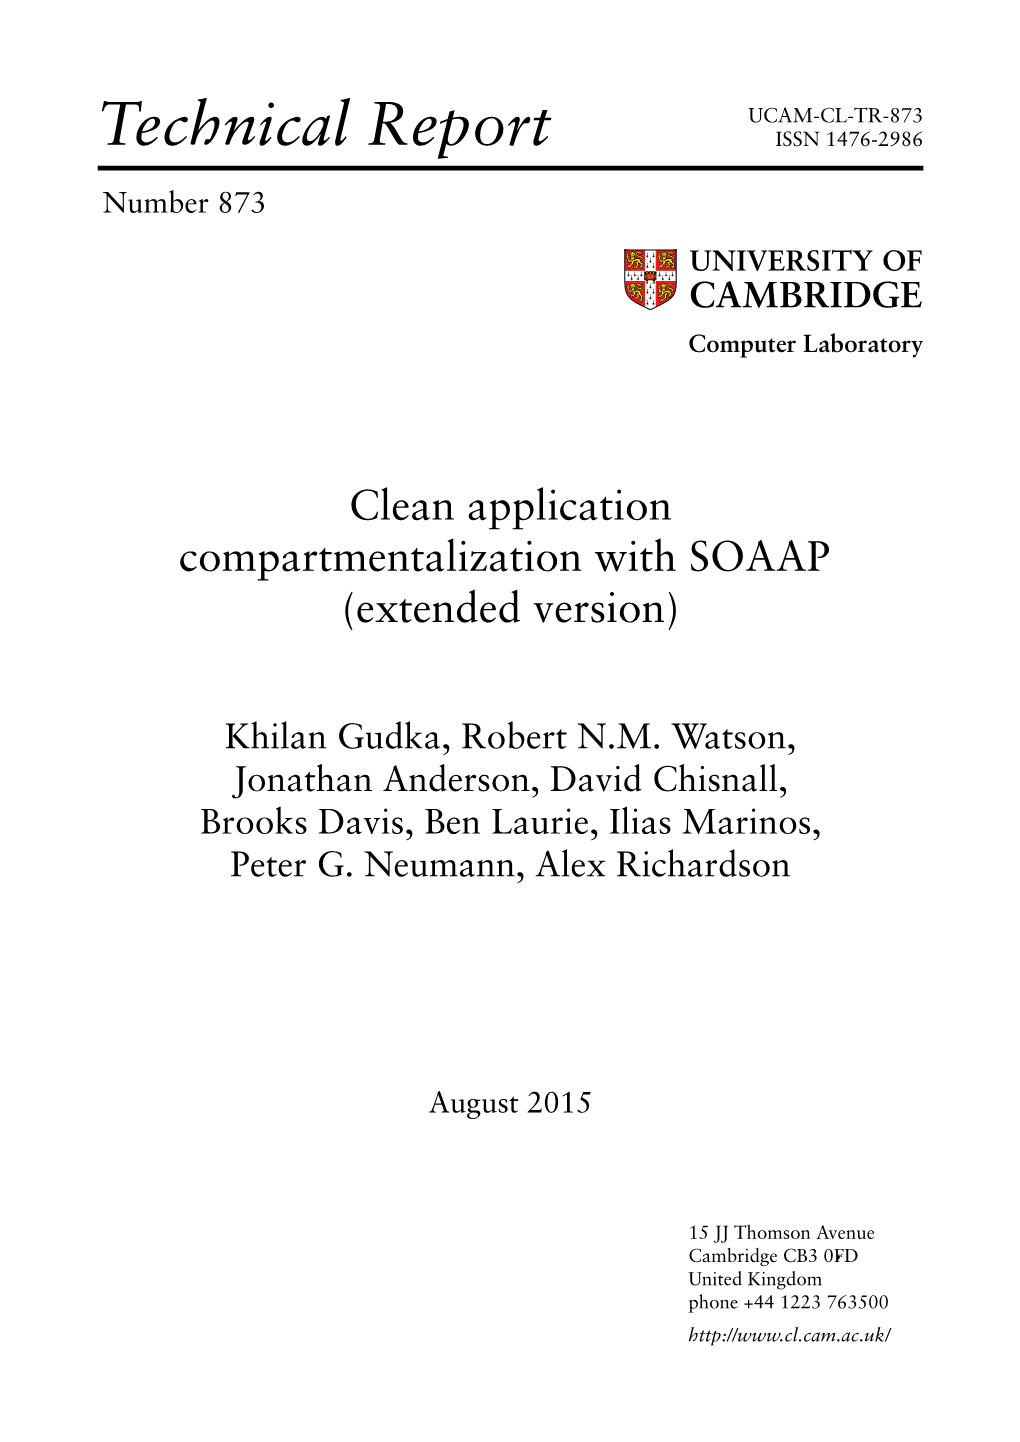 Clean Application Compartmentalization with SOAAP (Extended Version)